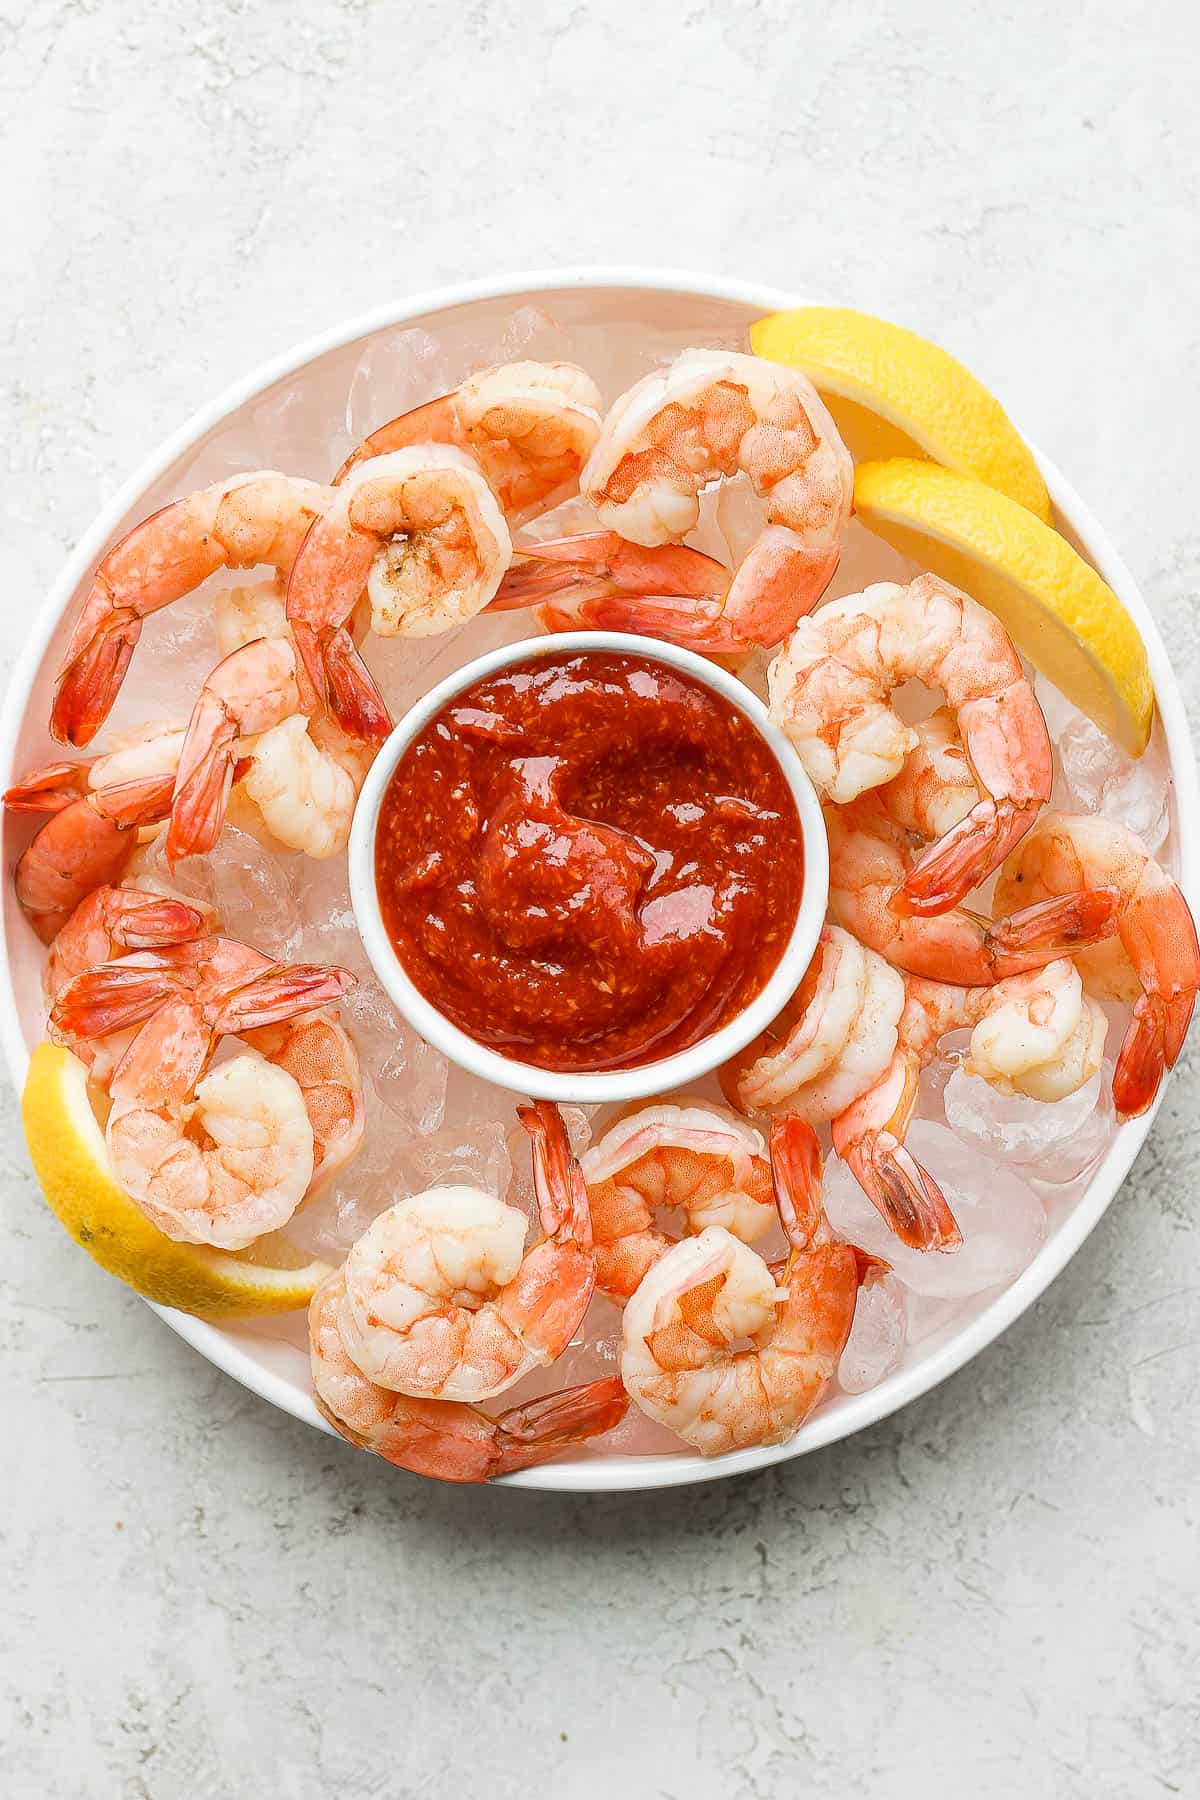 Shrimp cocktail served with the sauce over bed of ice with lemon wedges